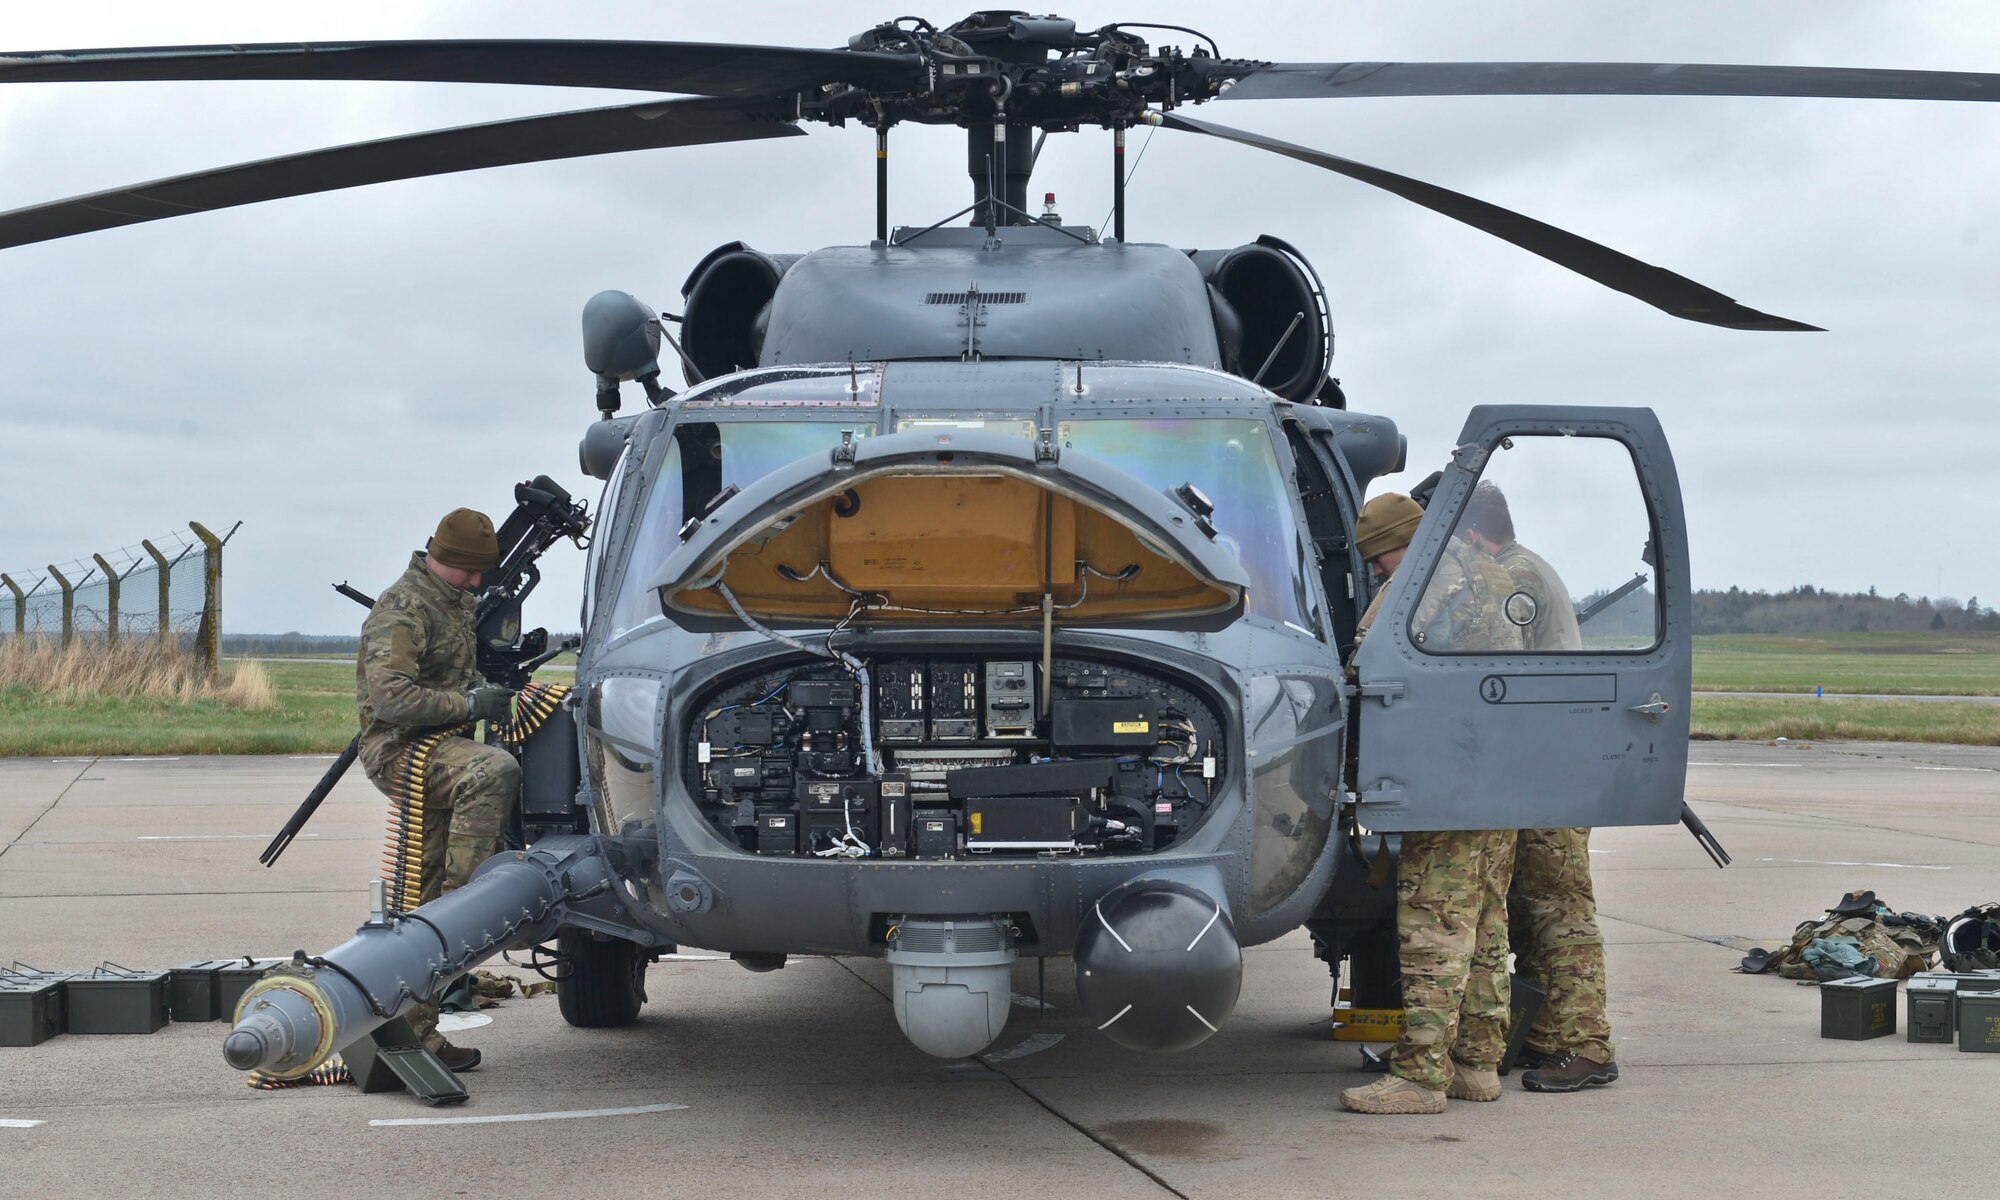 Crew members perform a preflight inspection on a 56th Rescue Squadron HH-60G Pave Hawk during Joint Warrior 2016 at Royal Air Force Lossiemouth, Scotland, April 15, 2016. Joint Warrior is a three-week multination event catered to enhancing the capabilities of its personnel for real-world events through various forms of training, including air-to-ground combat. (U.S. Air Force photo/Senior Airman Nigel Sandridge)